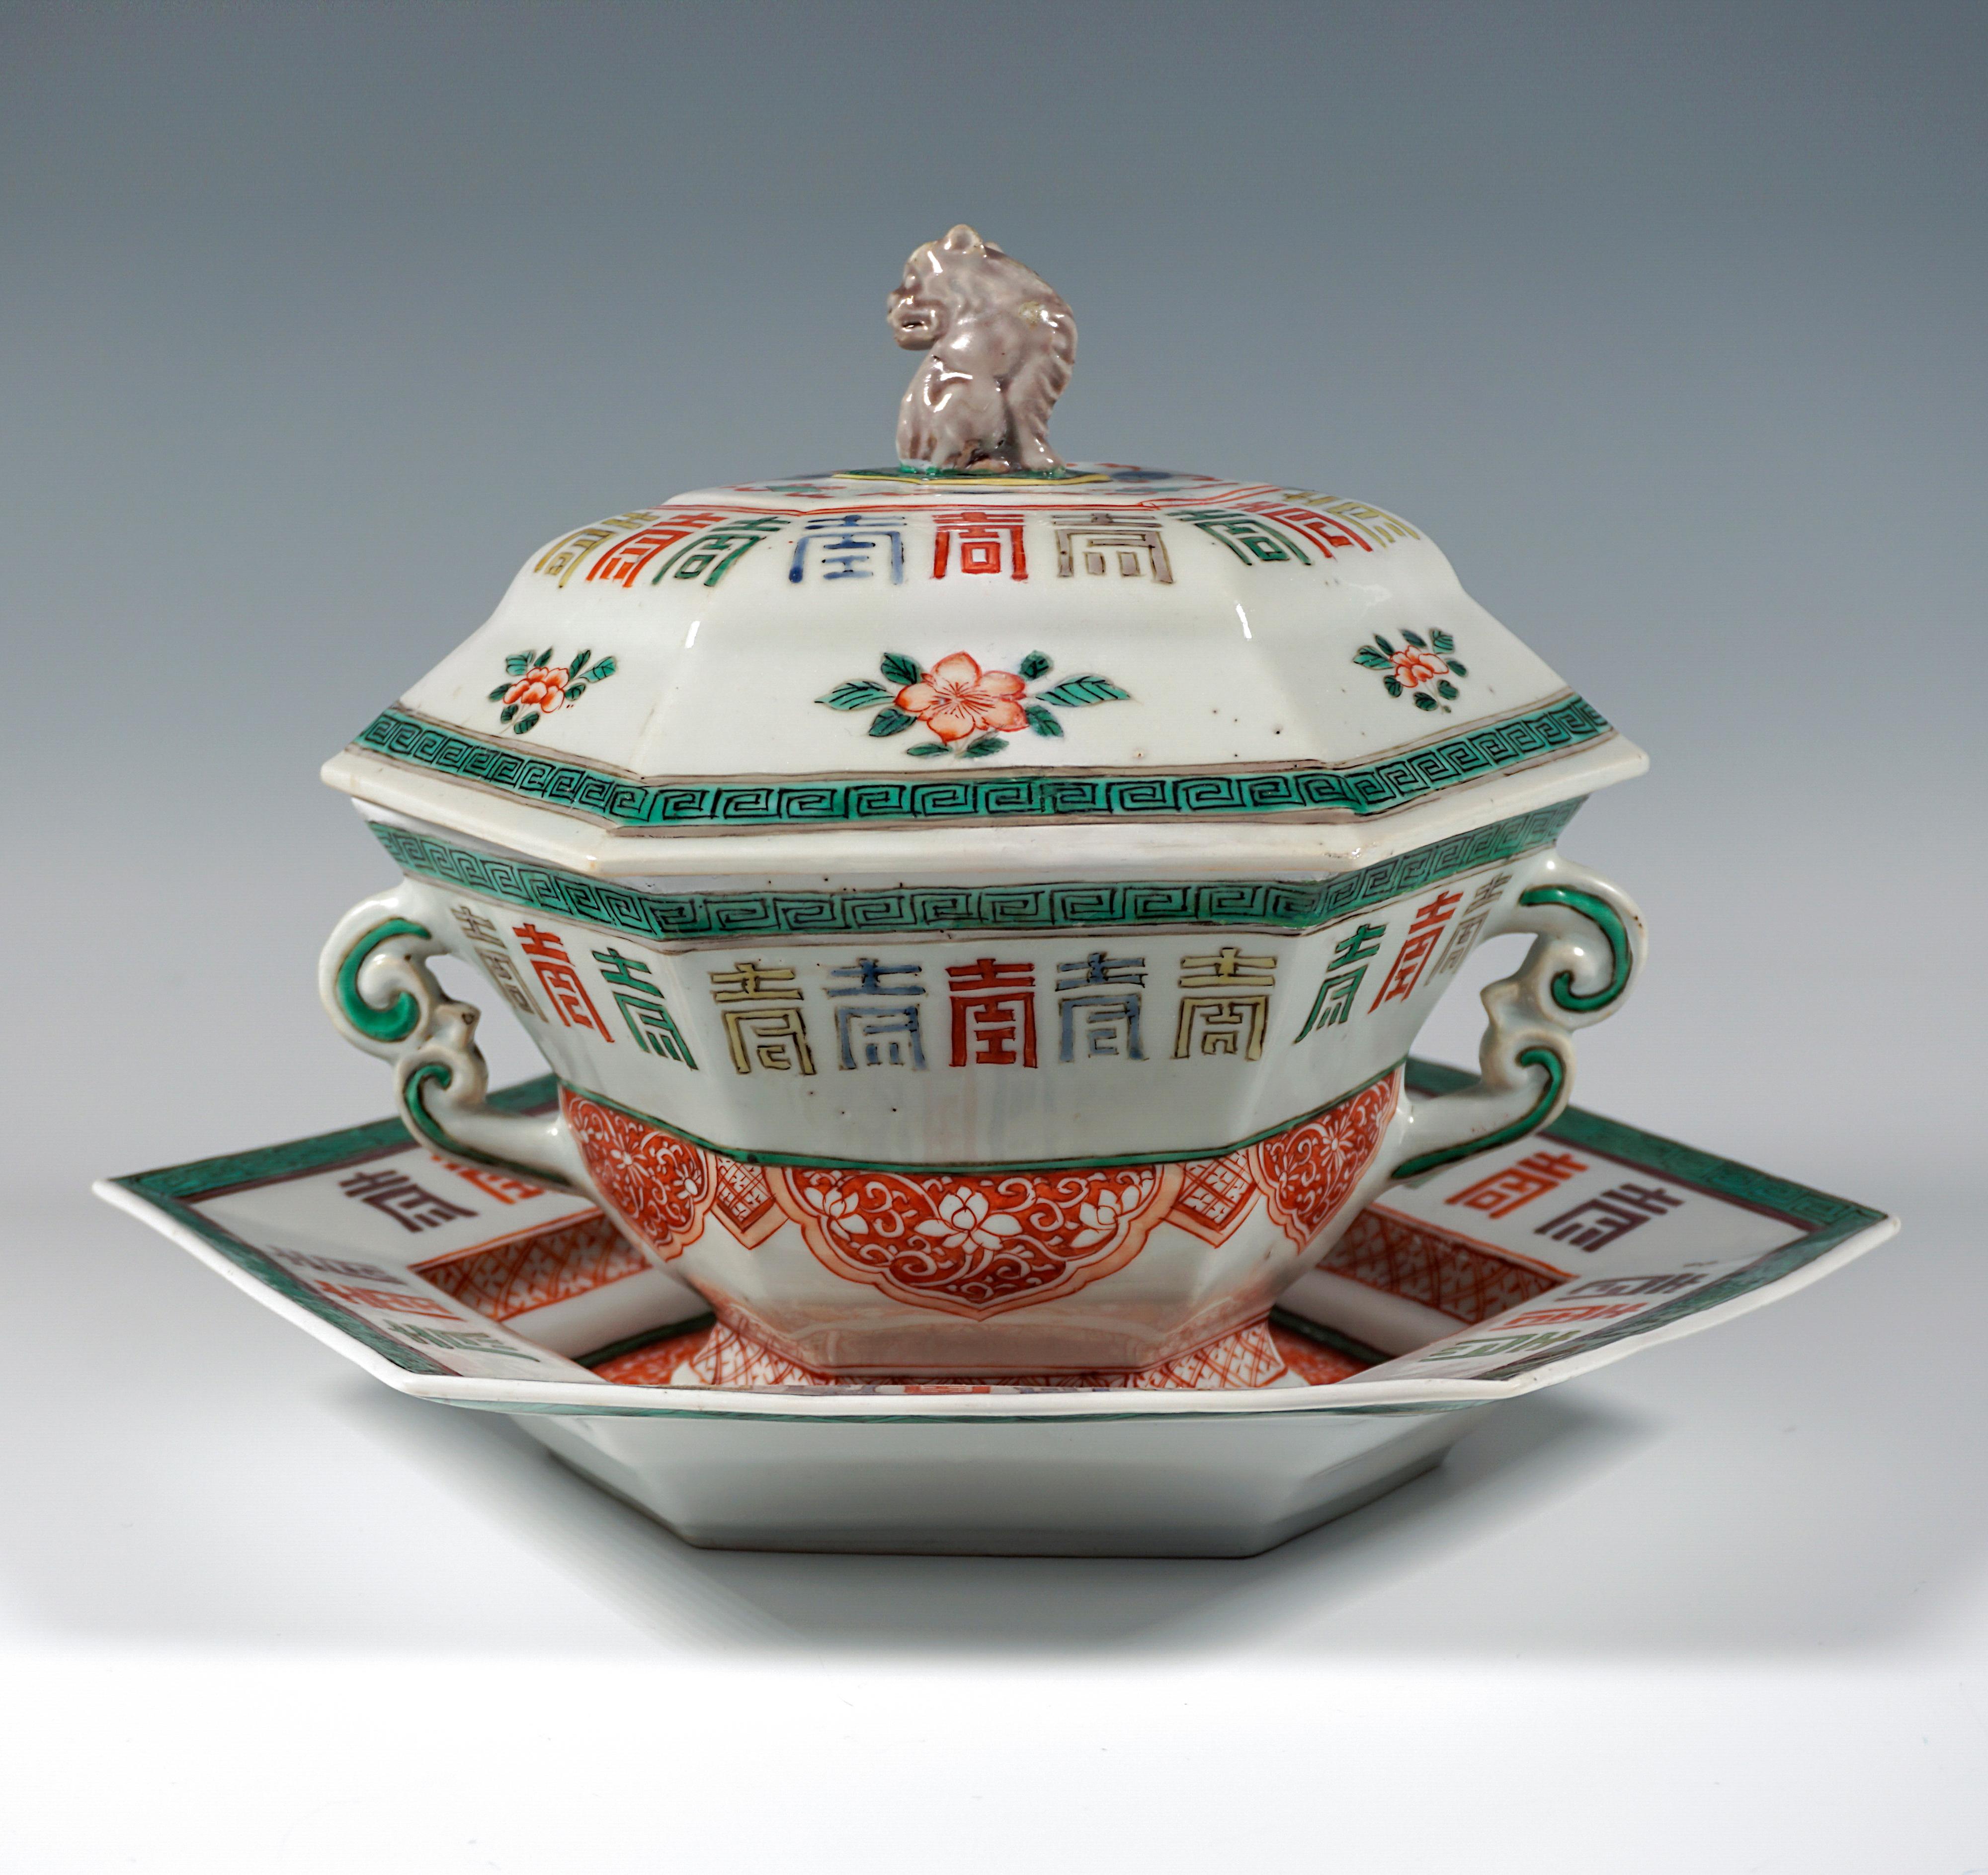 Chinoiserie Museal Early Asian Lidded Tureen With Présentoir, Meissen Germany 1740-1780 For Sale